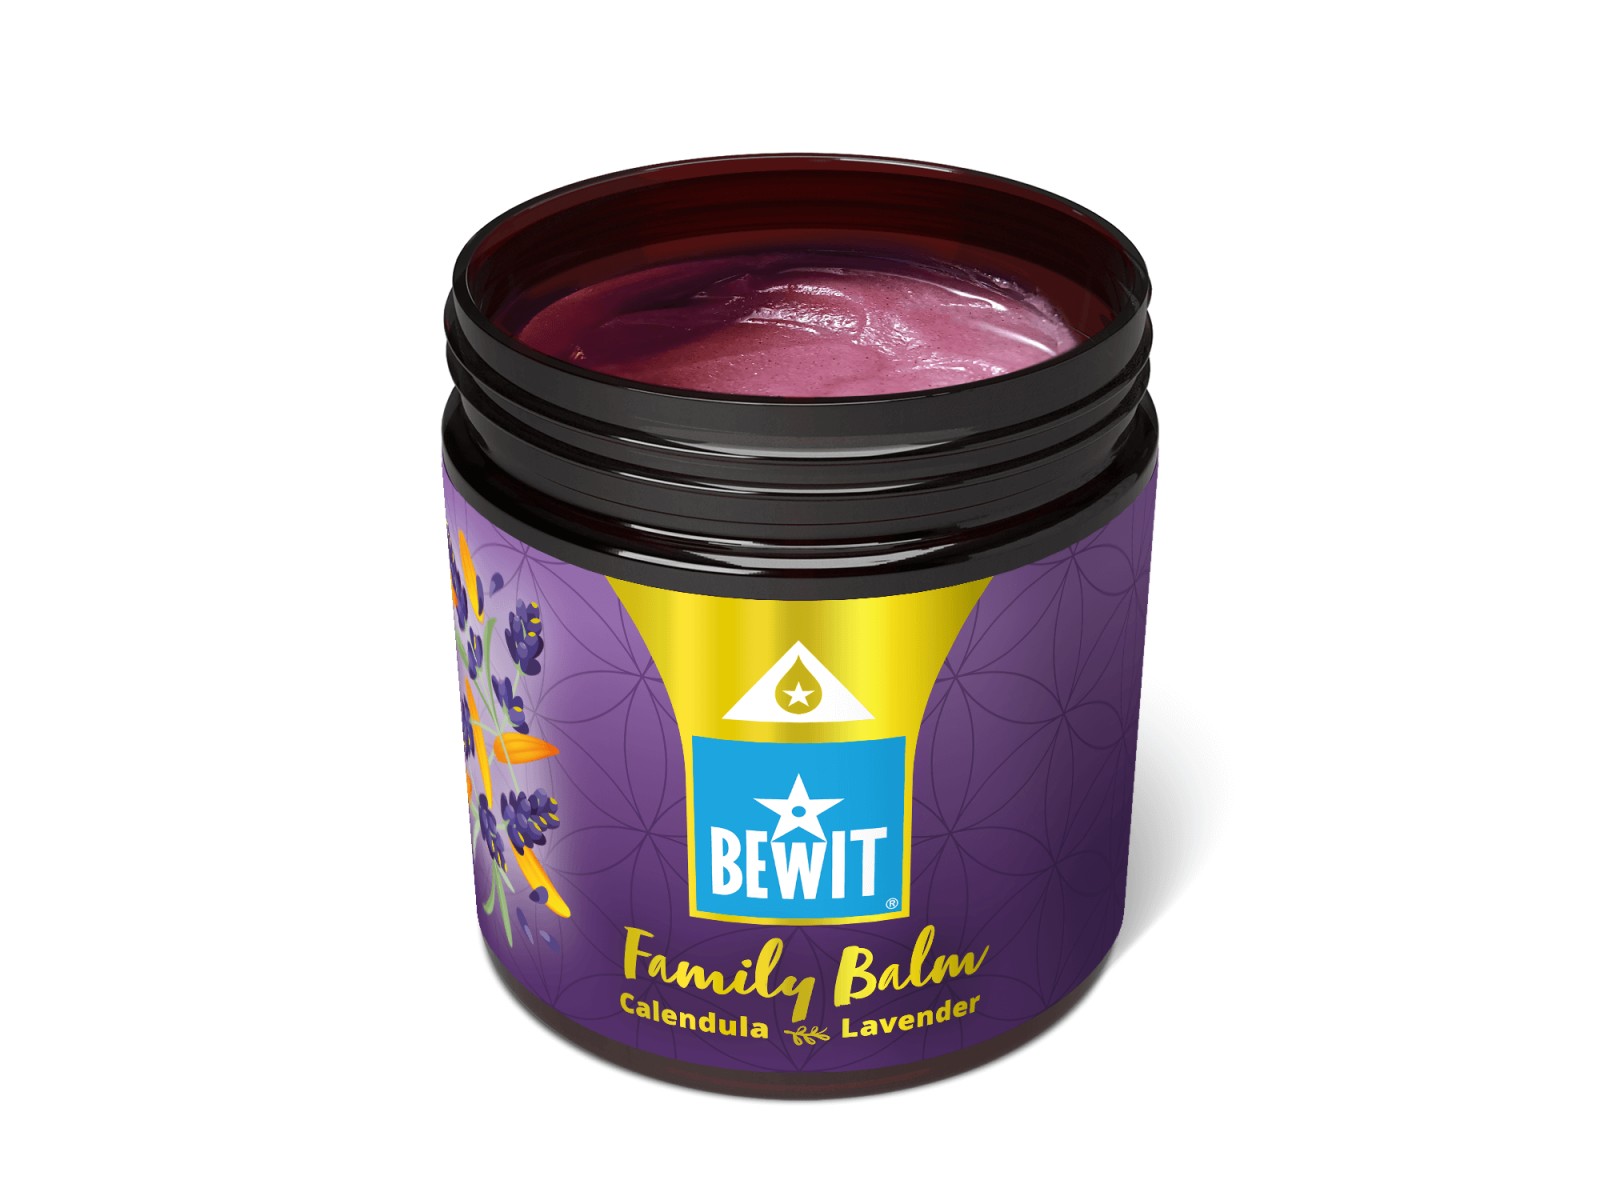 FAMILY BALM CALENDULA AND LAVENDER - CARING BALM FOR THE WHOLE FAMILY - 3